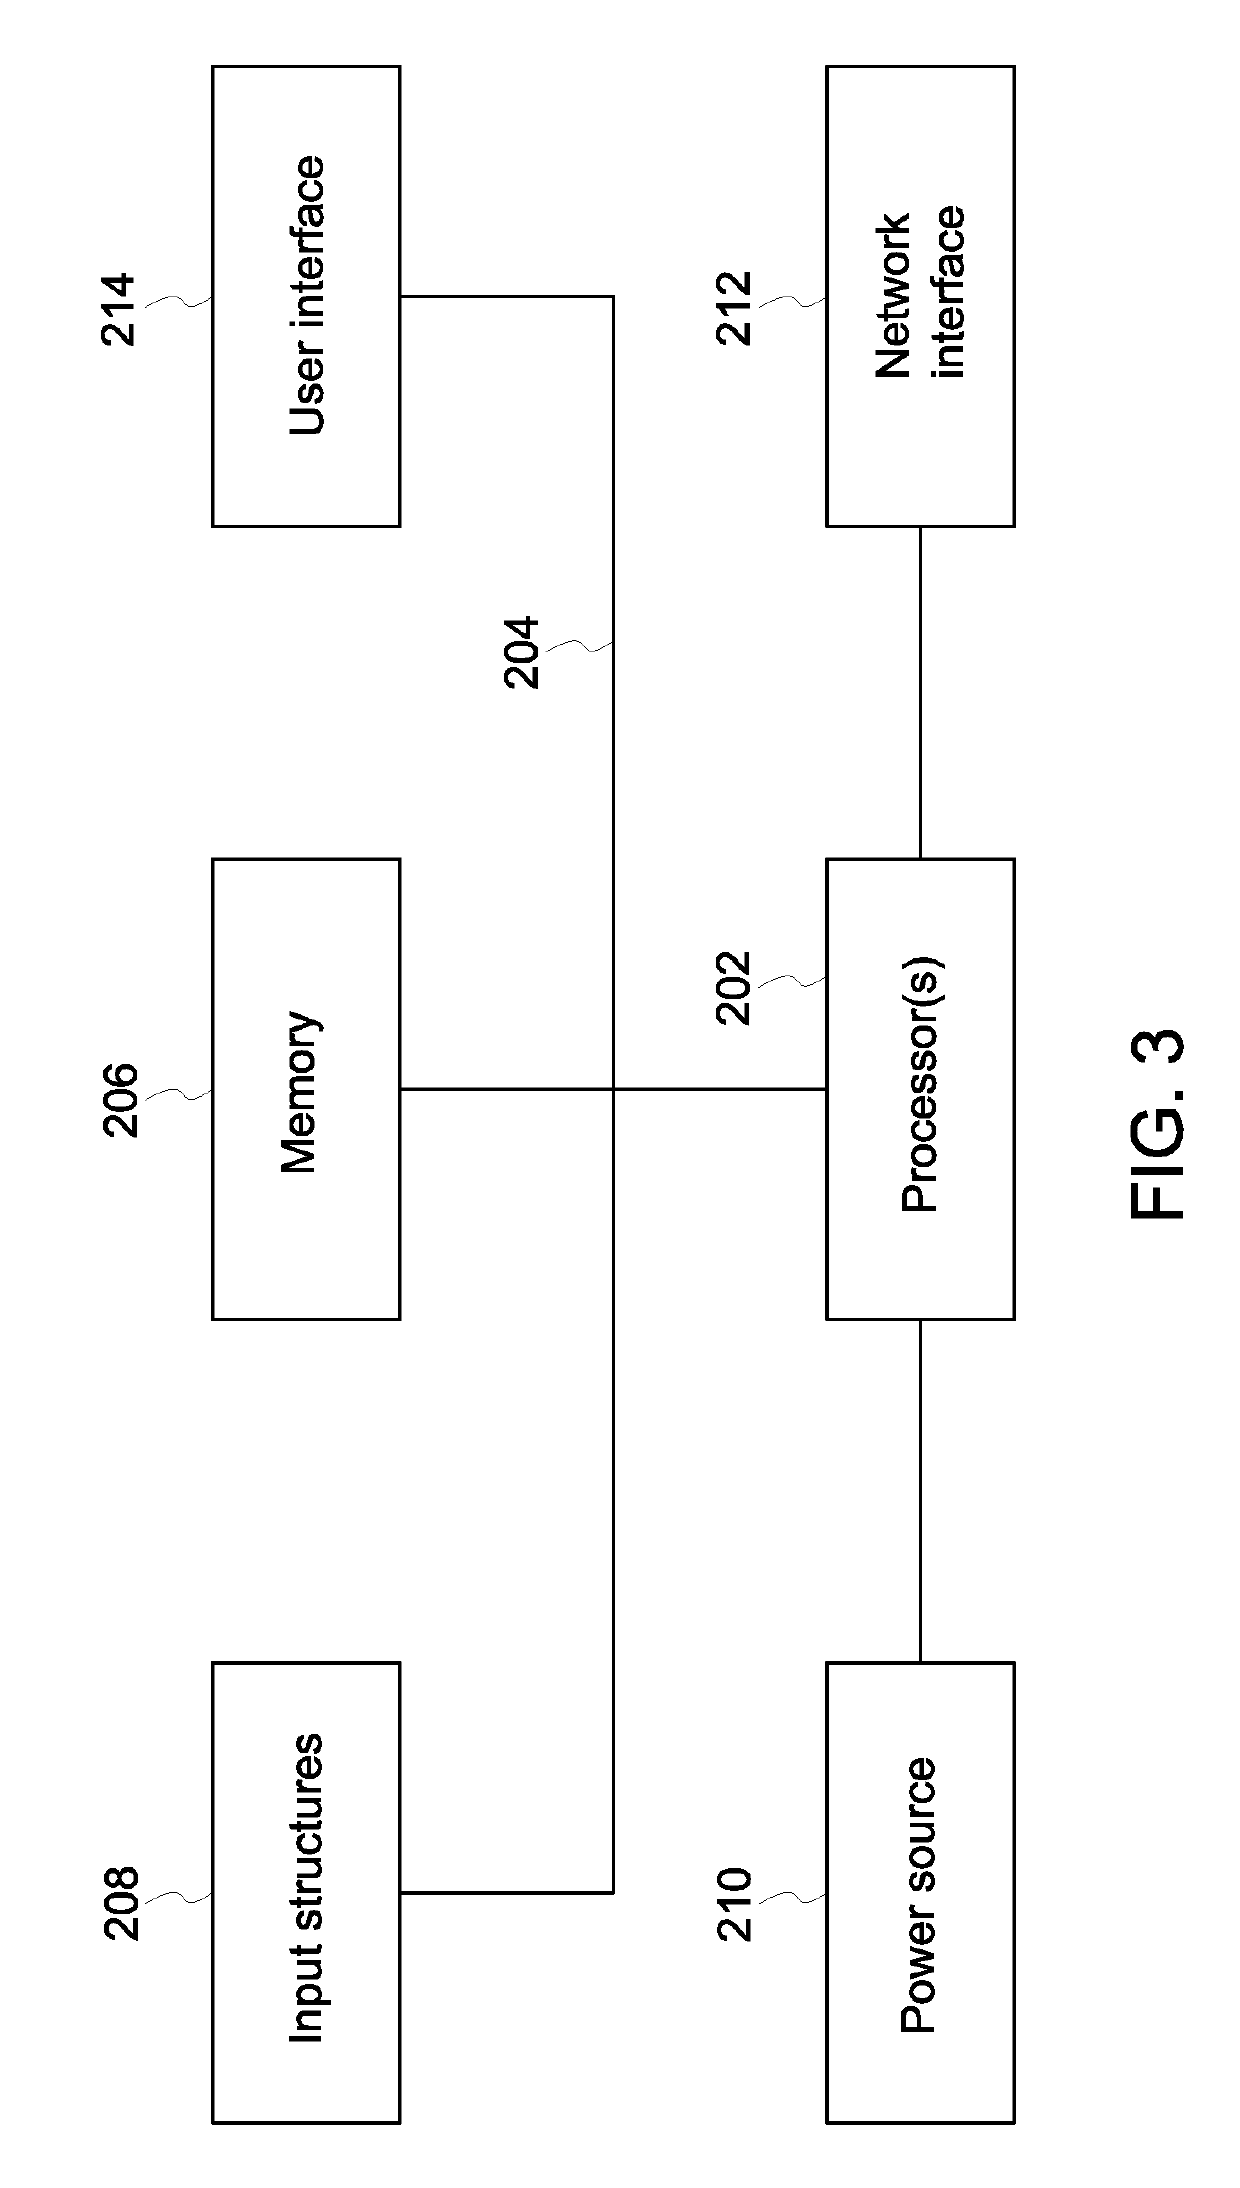 Systems and method for robotic learning of industrial tasks based on human demonstration